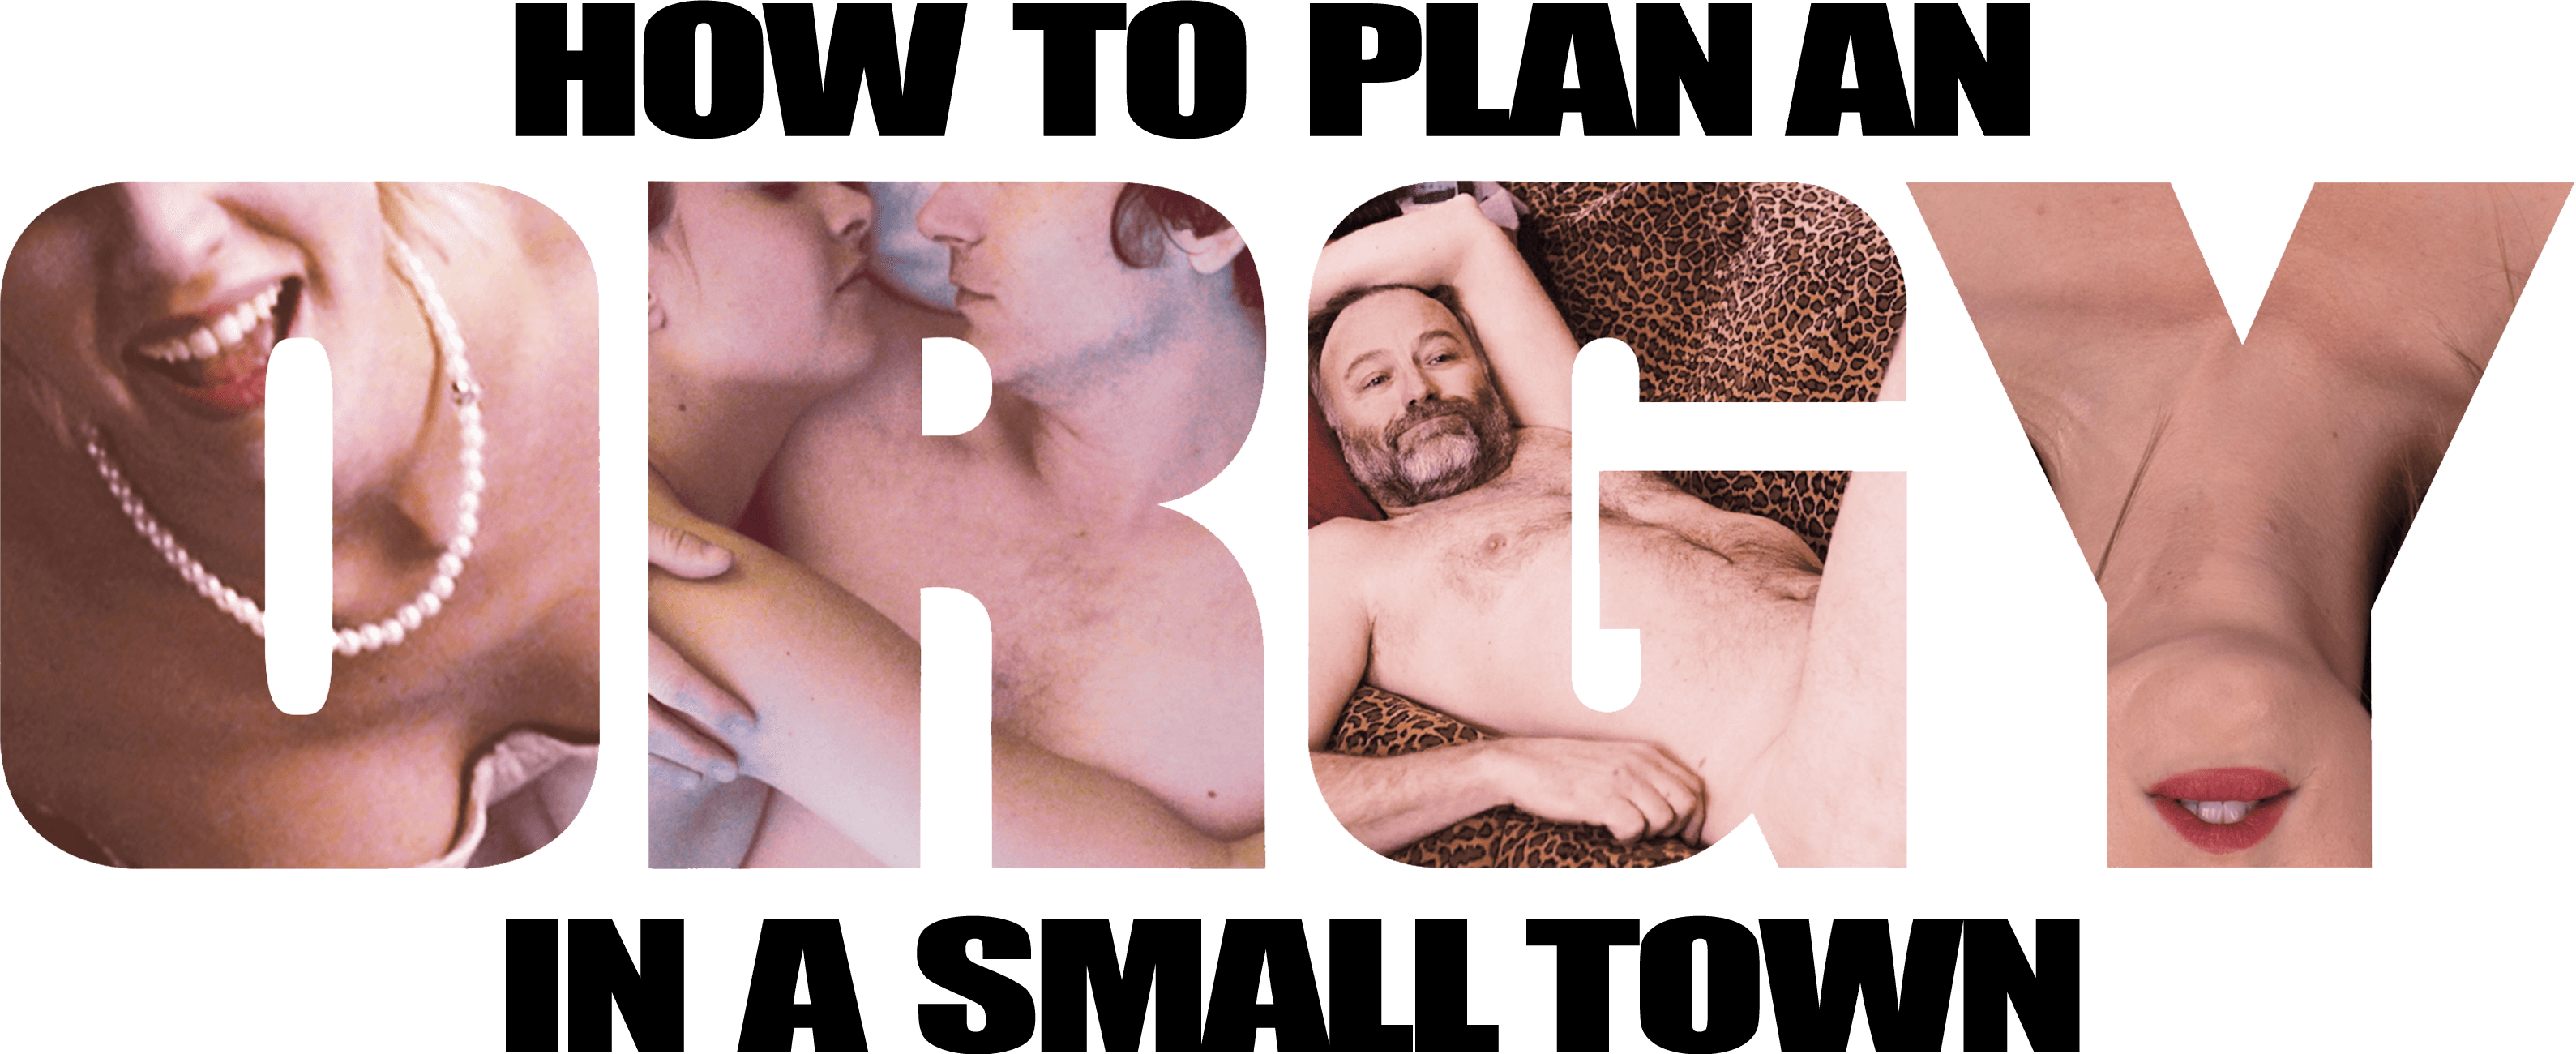 How to Plan an Orgy in a Small Town logo